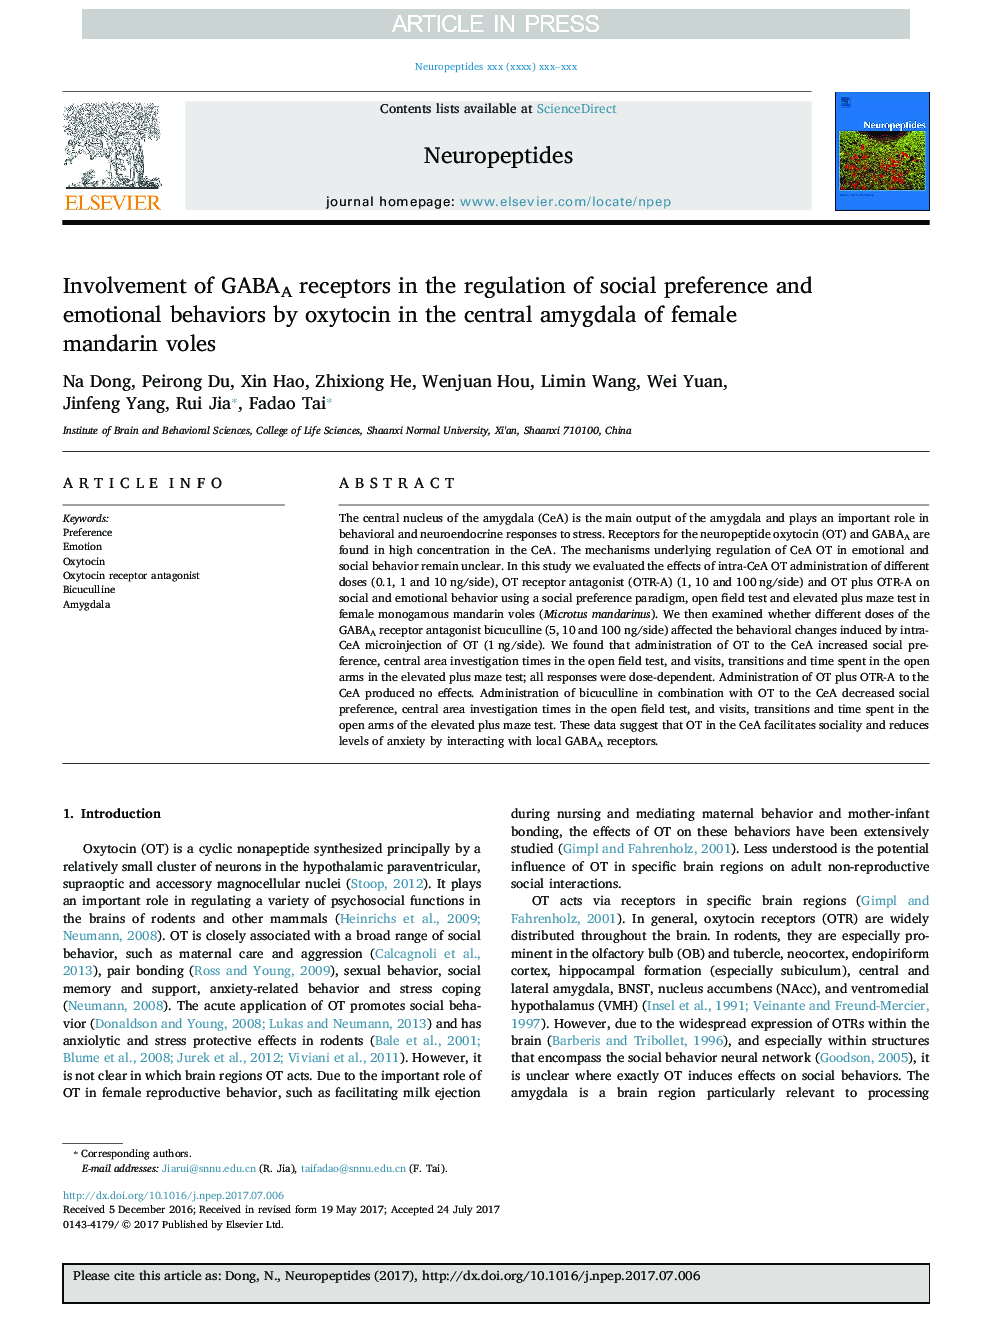 Involvement of GABAA receptors in the regulation of social preference and emotional behaviors by oxytocin in the central amygdala of female mandarin voles